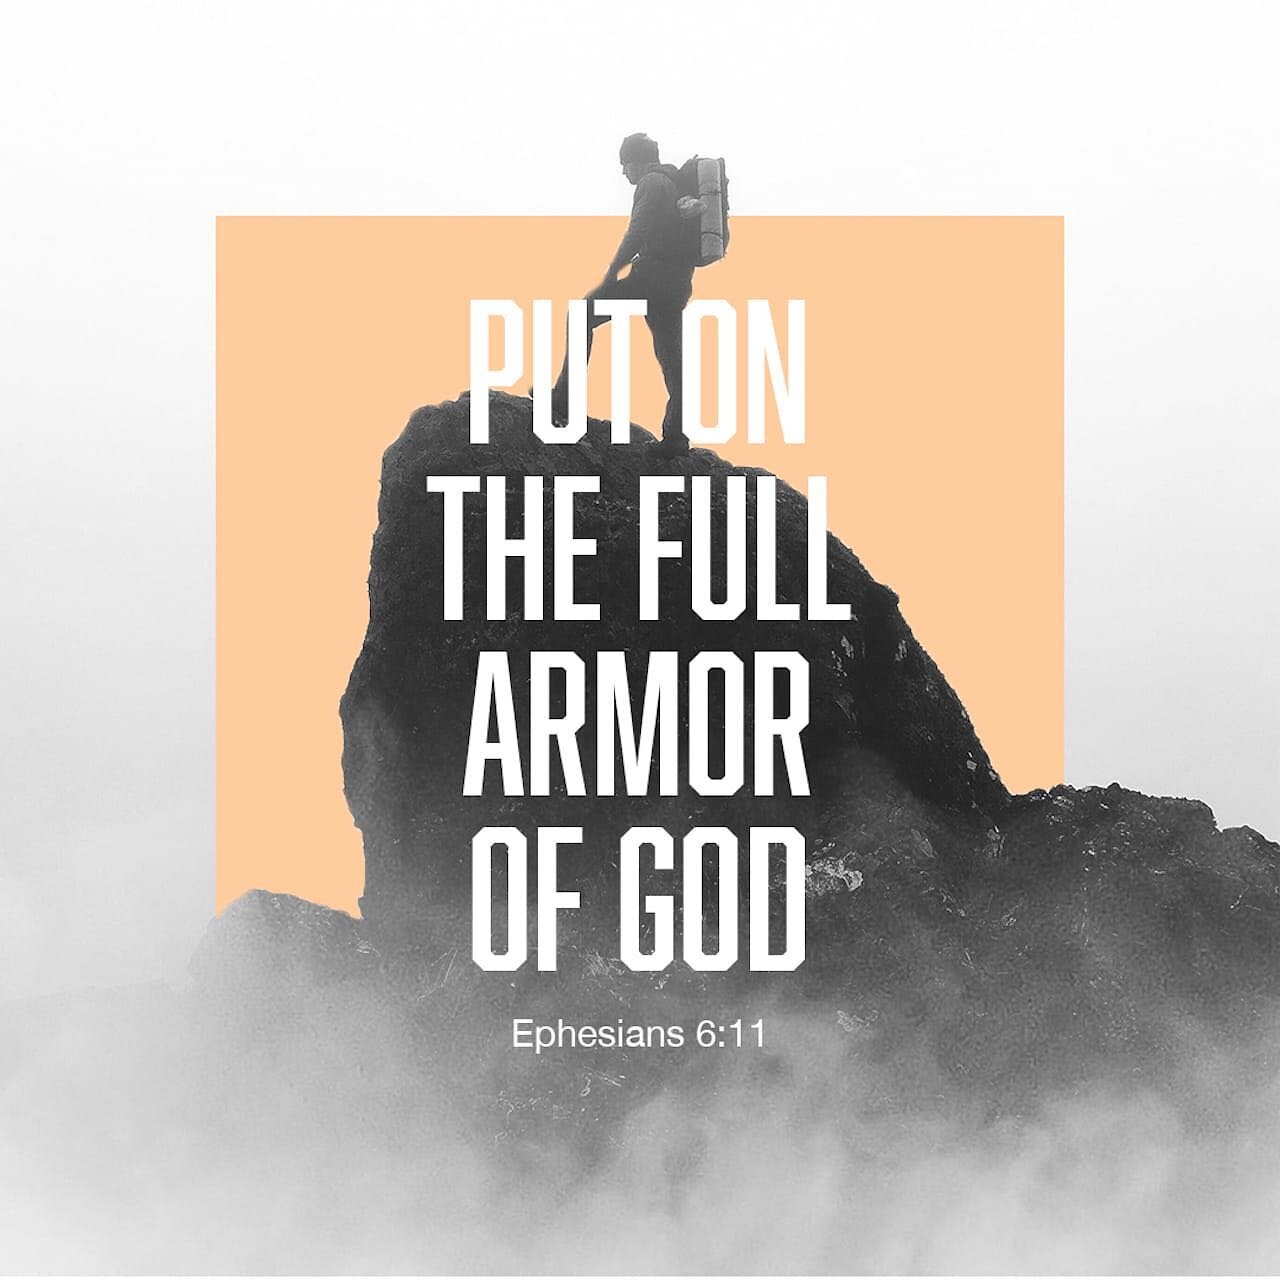 Friends, join us this morning as we strengthen our armor.
Blessings from The Hill Country